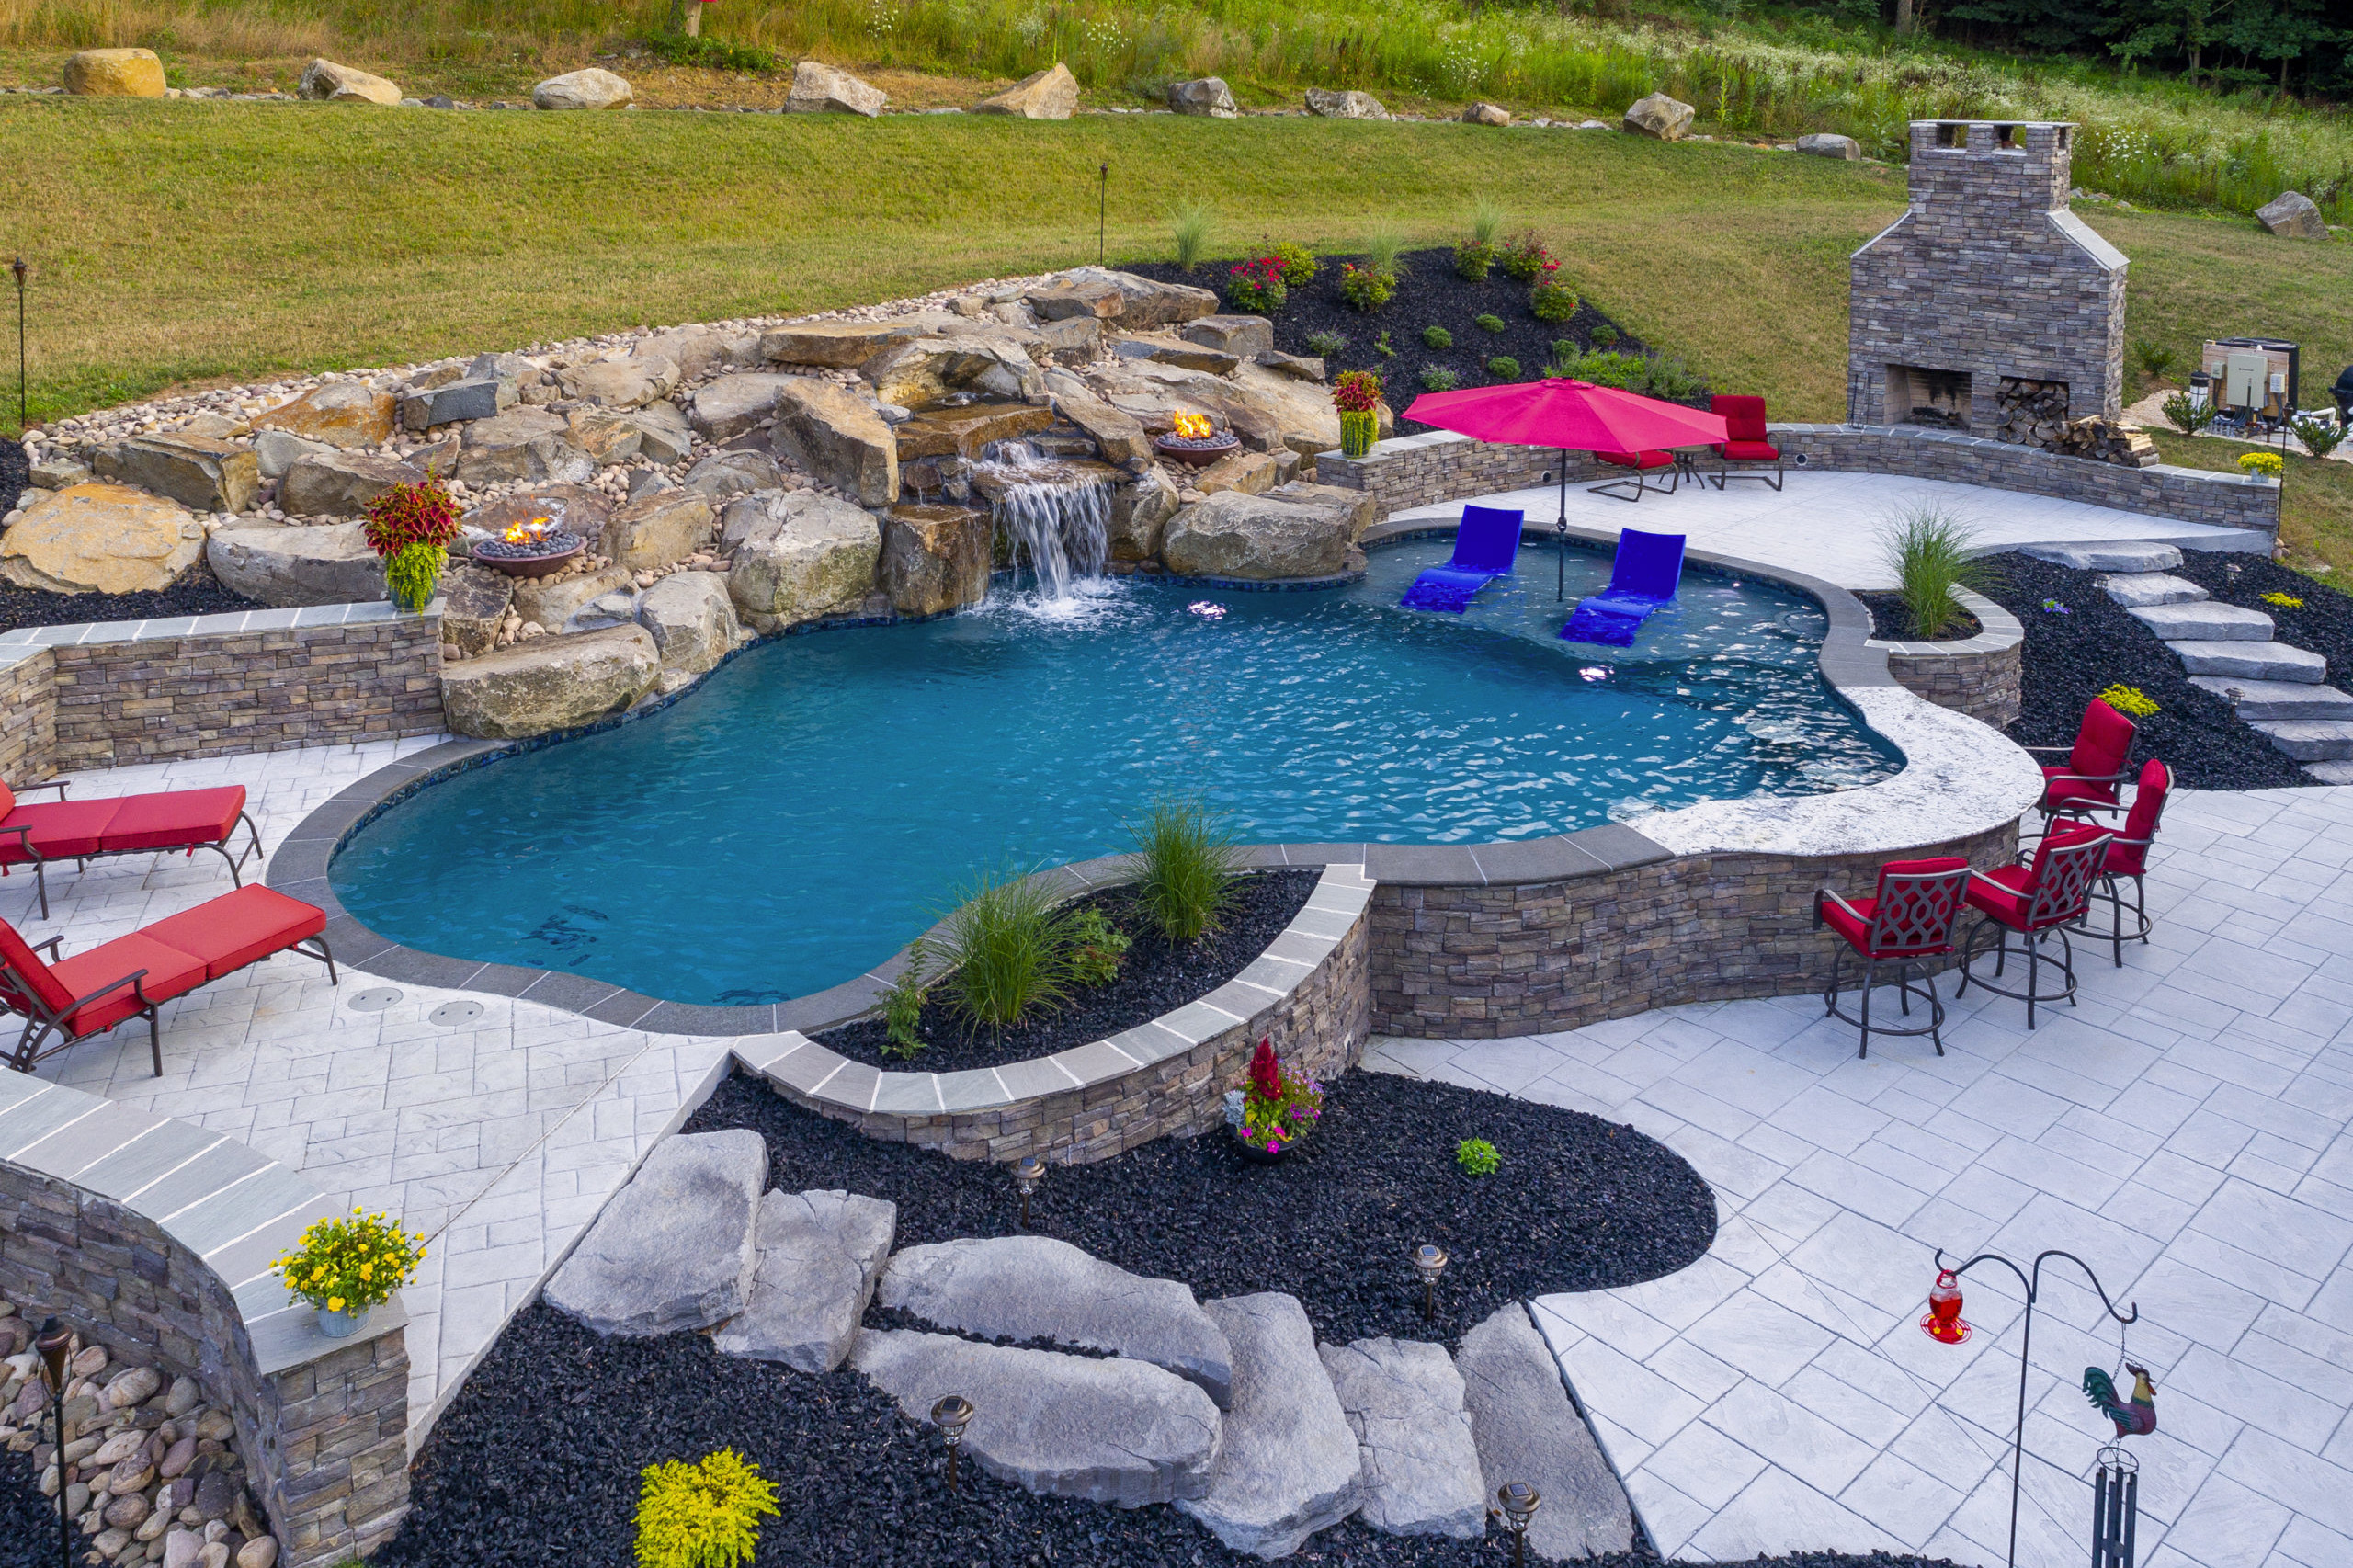 Wavy pool with red chairs and umbrellas